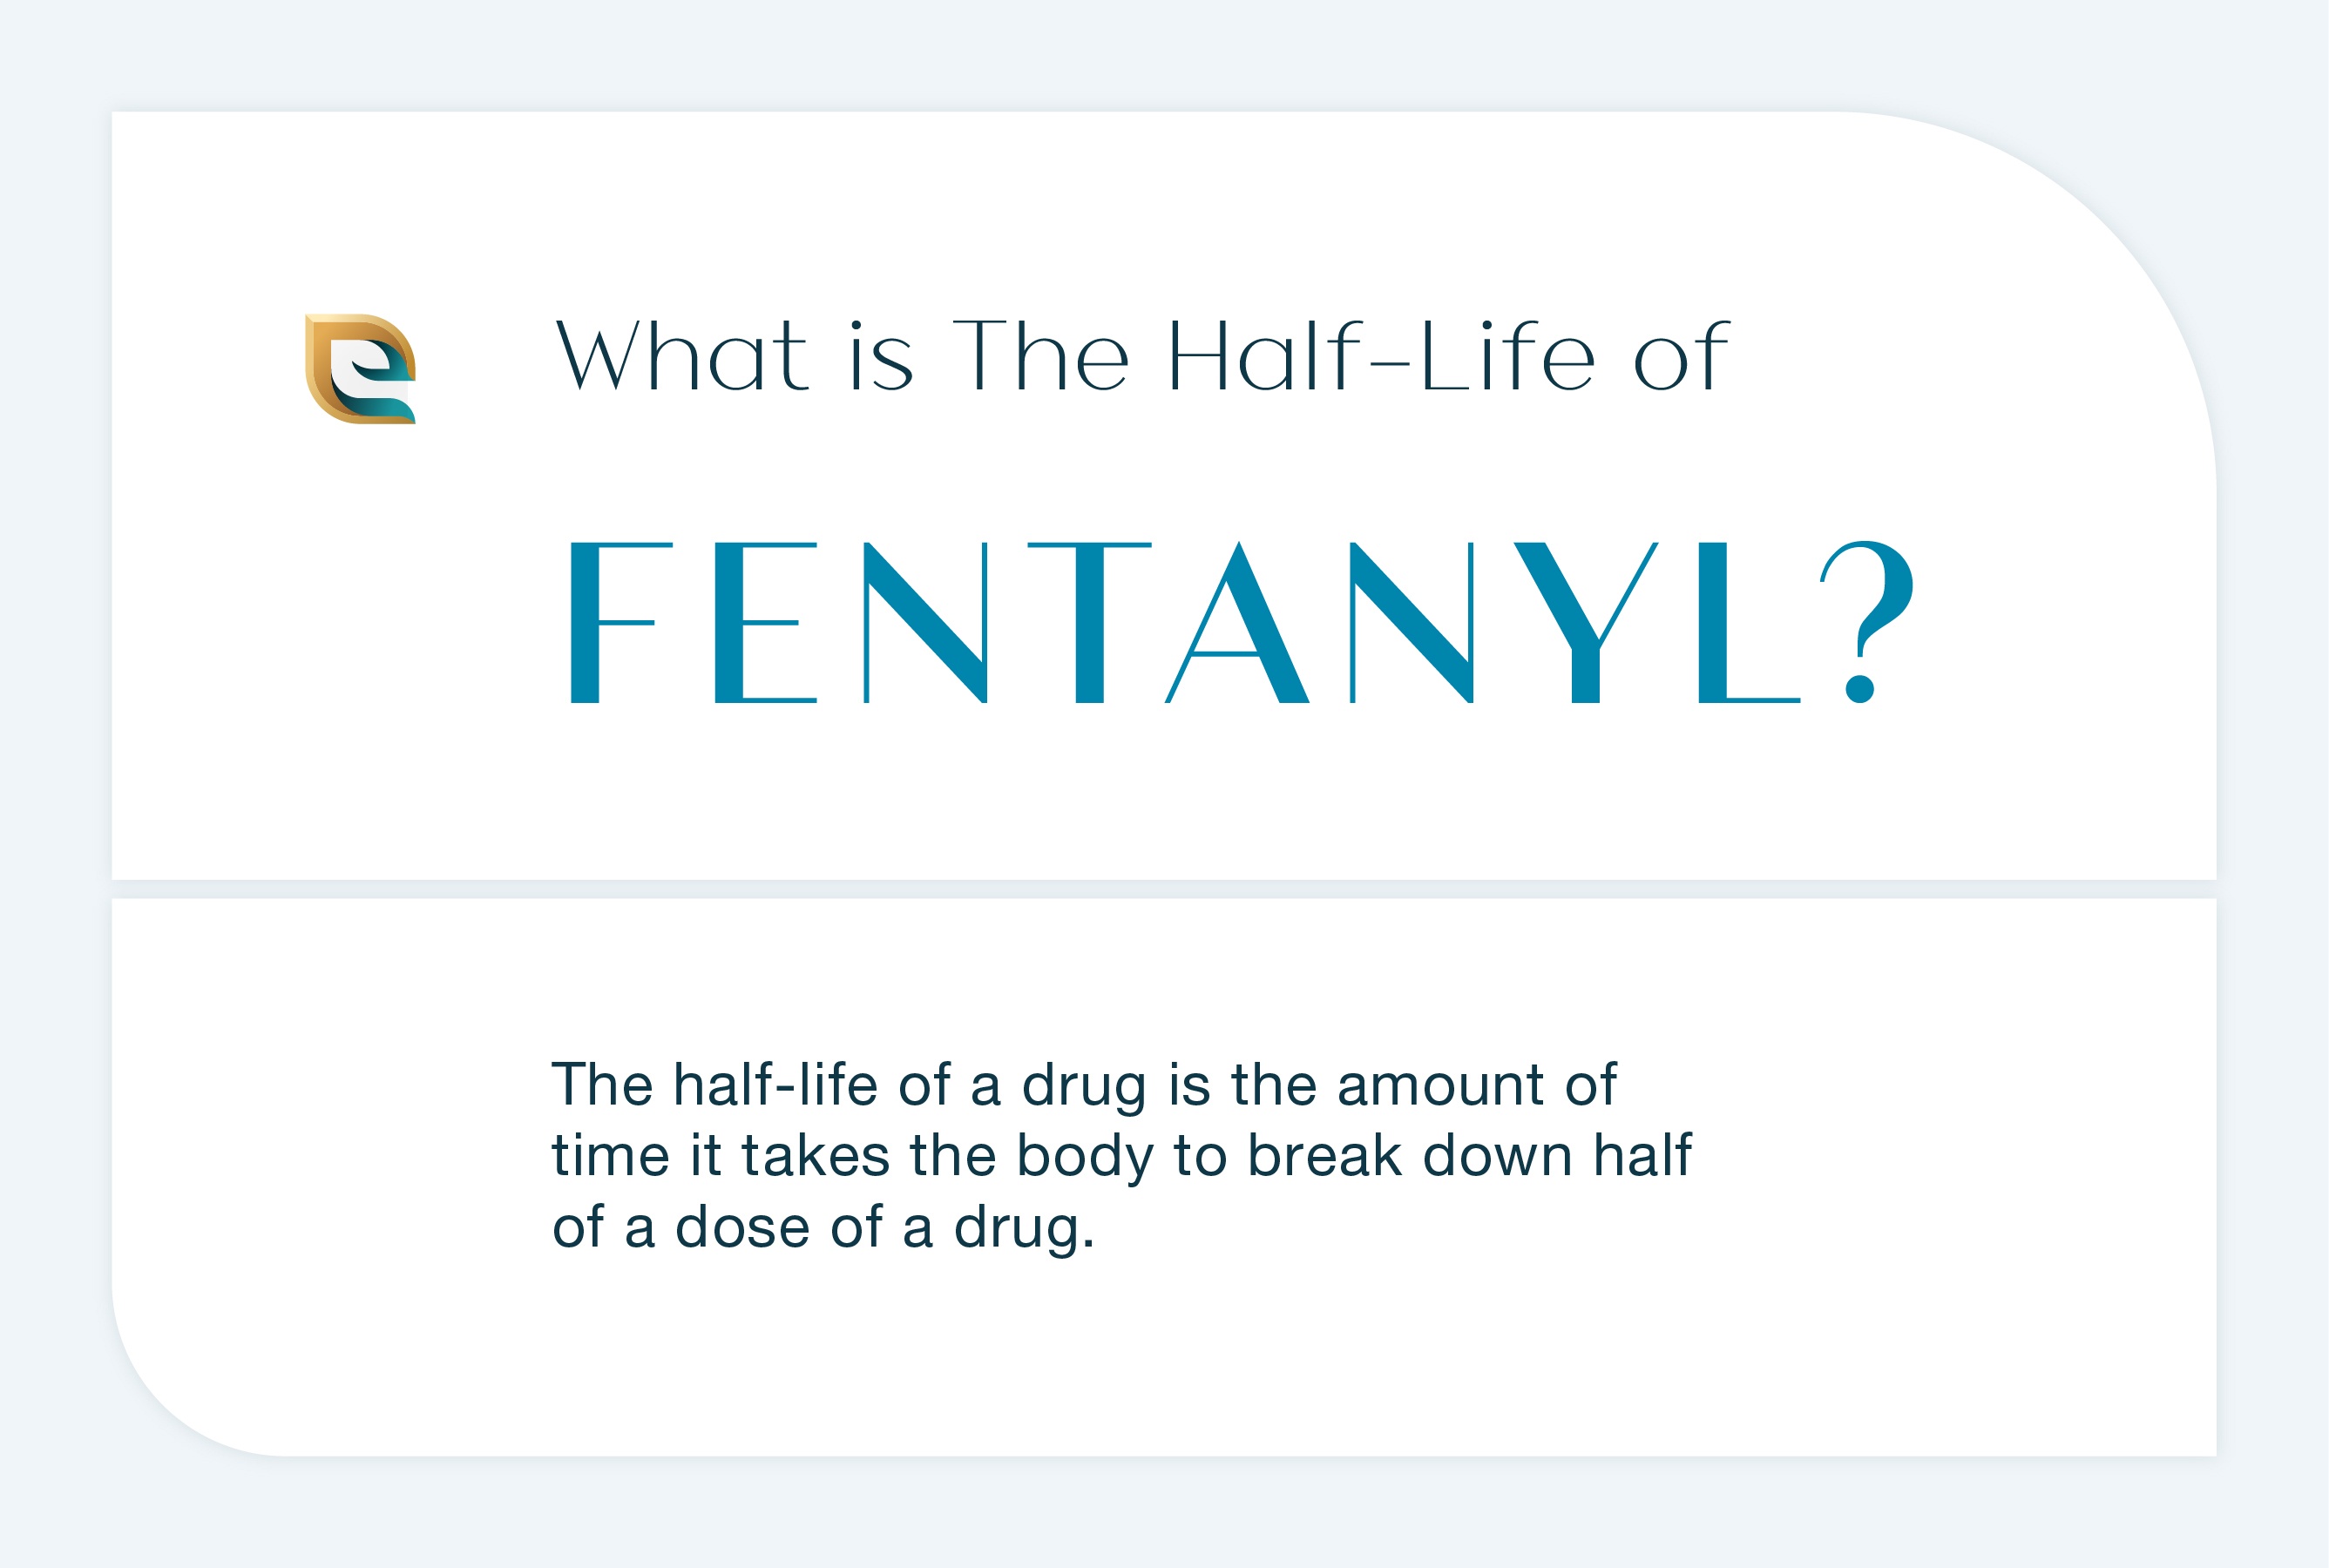 What Is The Half Life of Fentanyl? This image describes the half life of Fentanyl